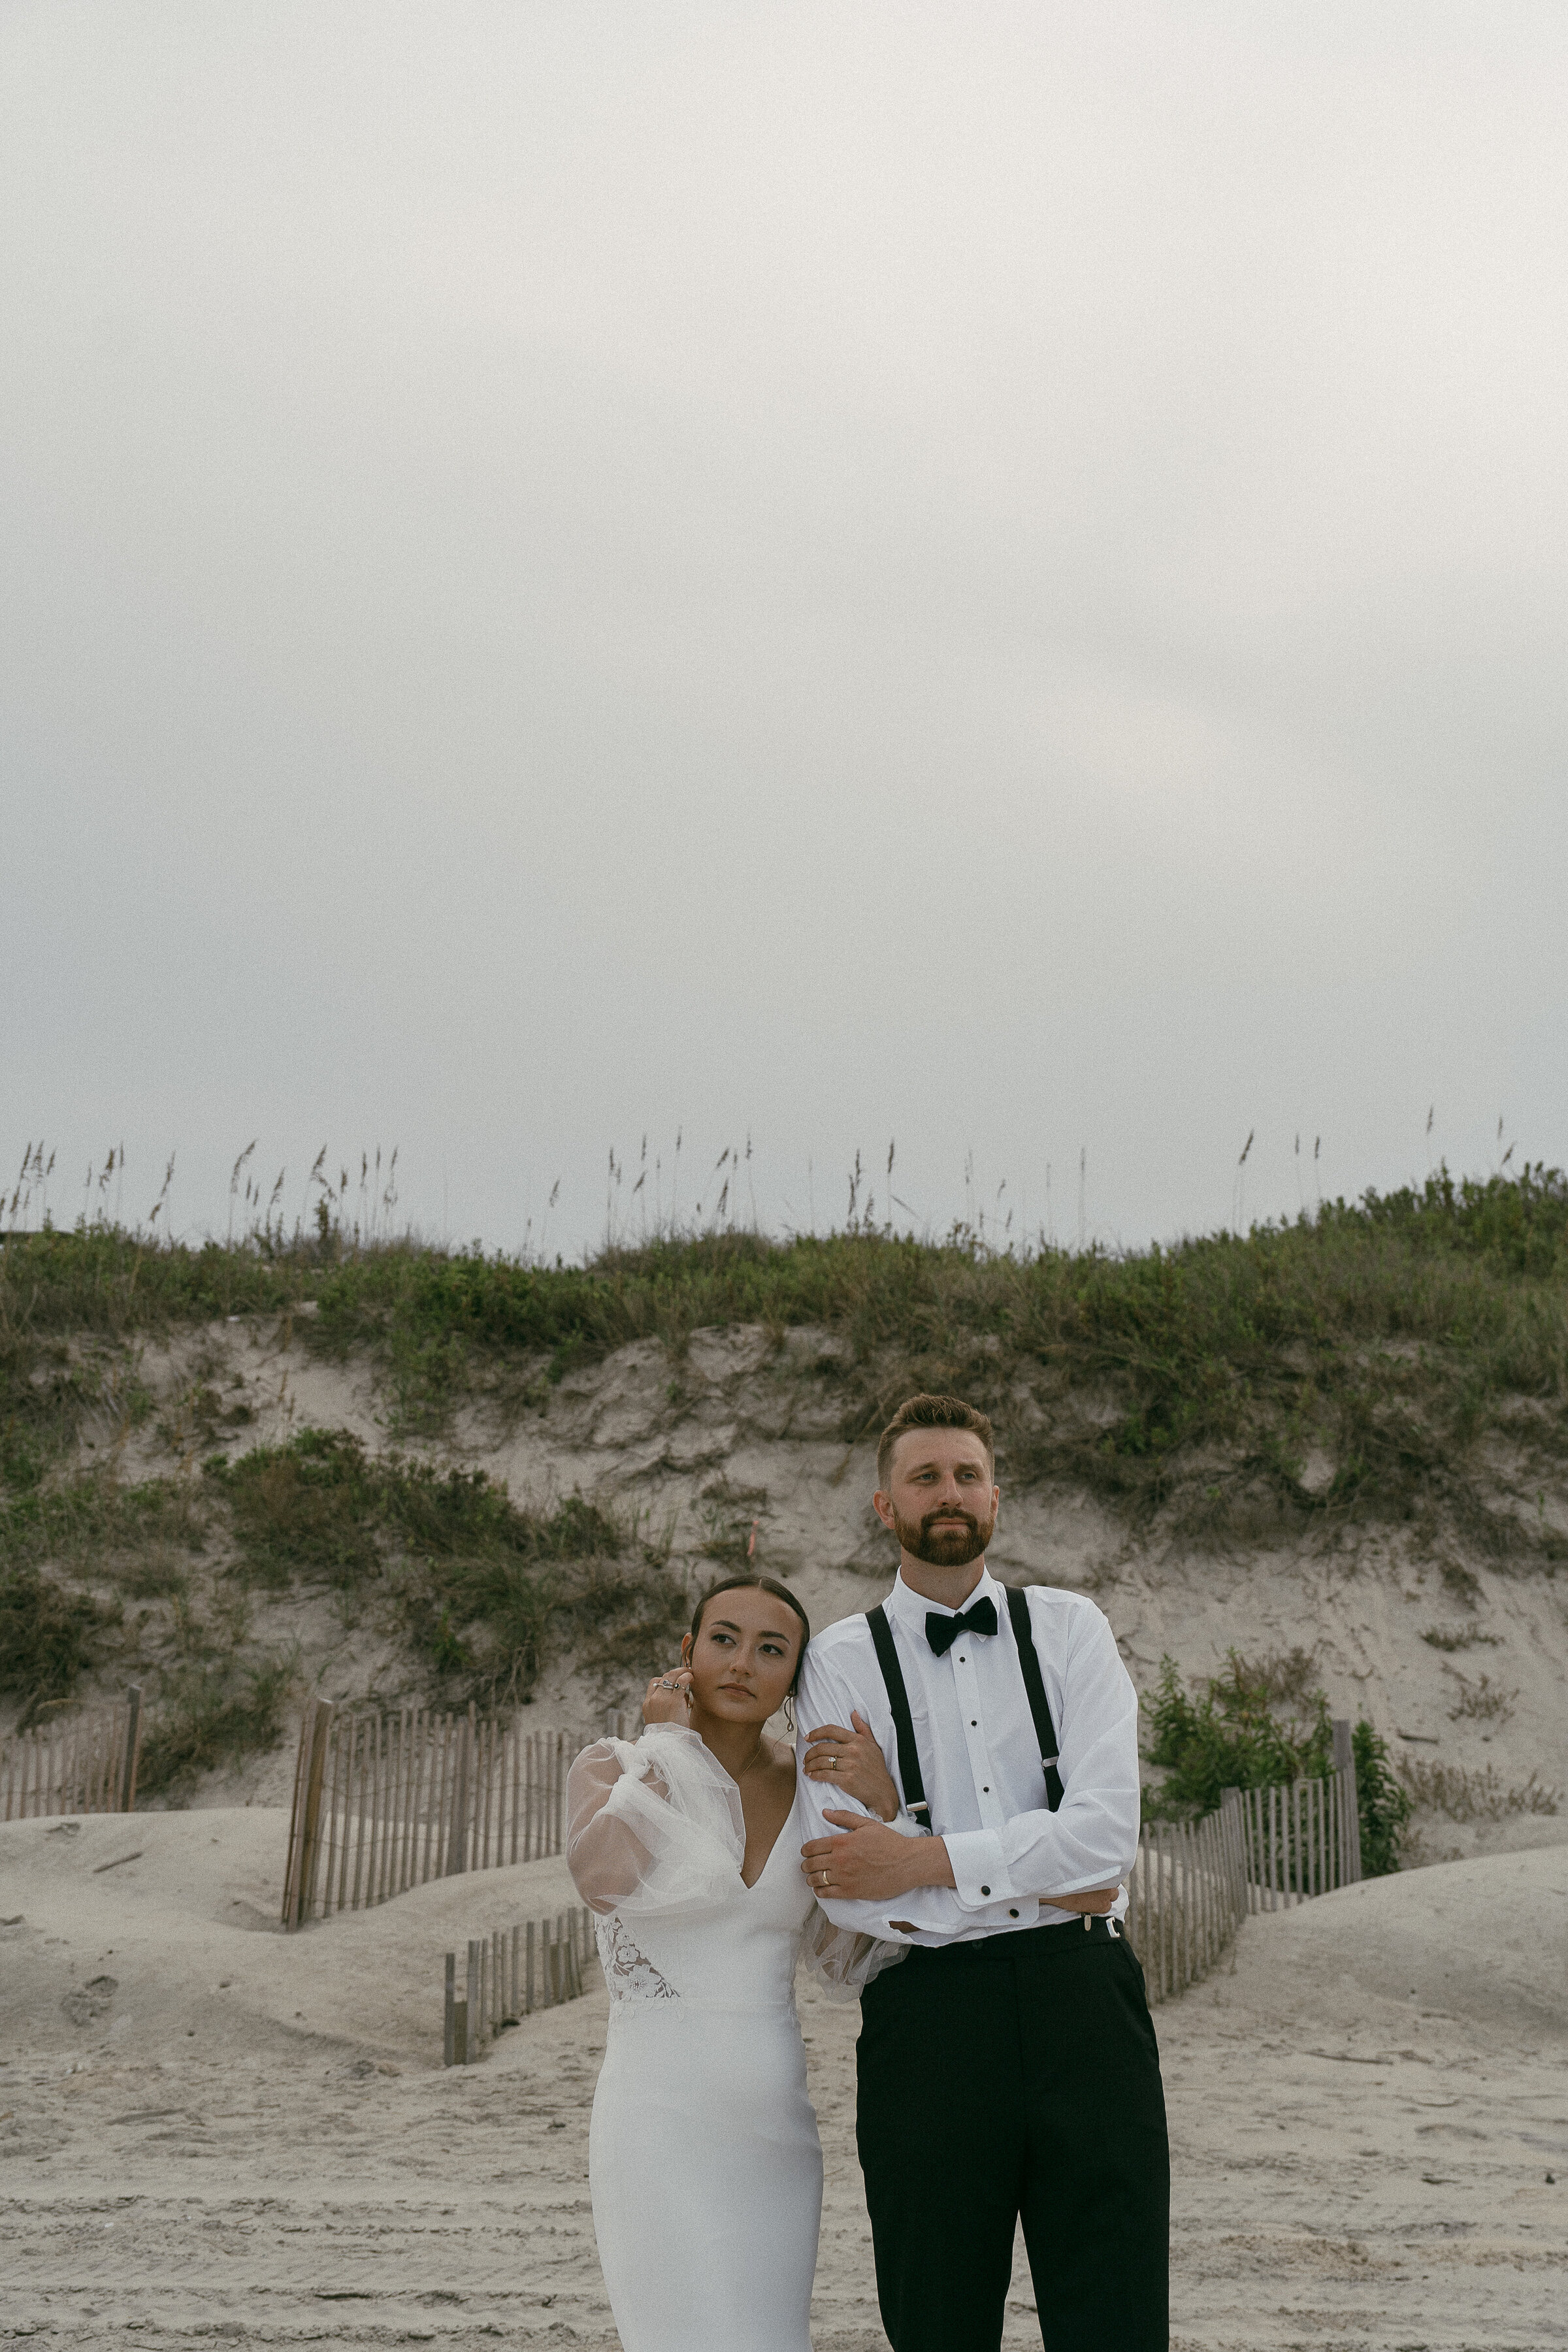 Bride and groom standing on beach with dunes backdrop